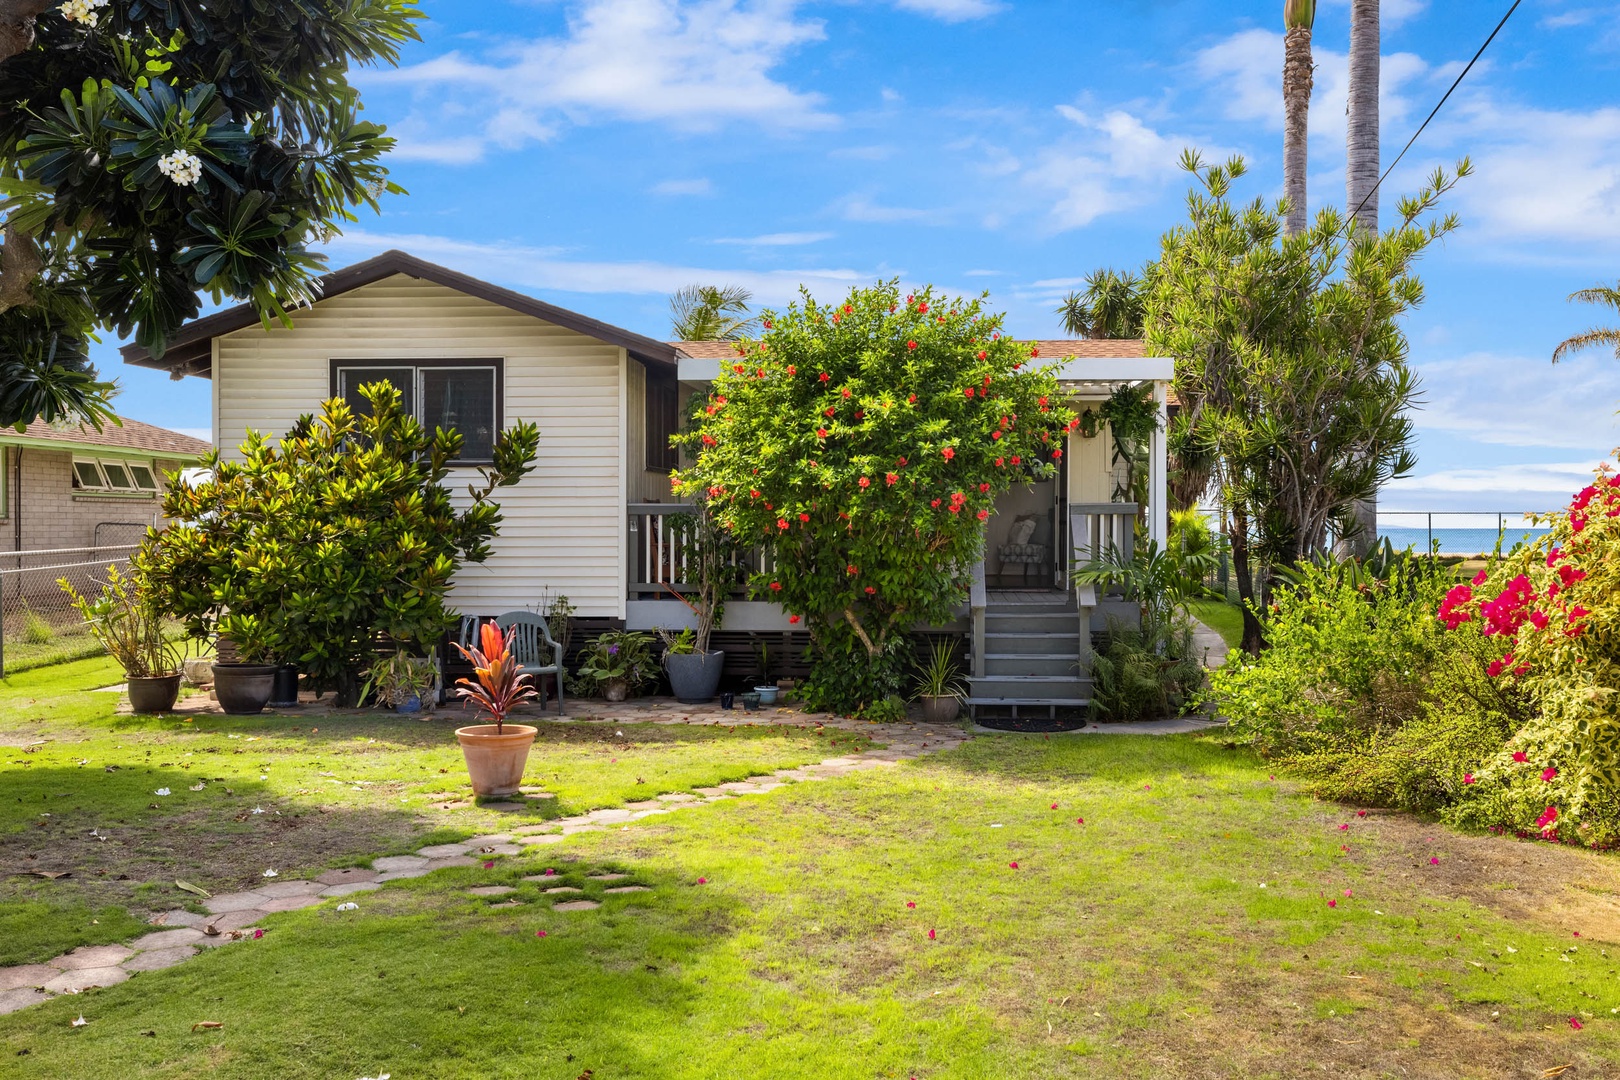 Ewa Beach Vacation Rentals, Ewa Beachfront Cottage - Welcome to your Hawaiian oceanfront haven with a lush garden yard.